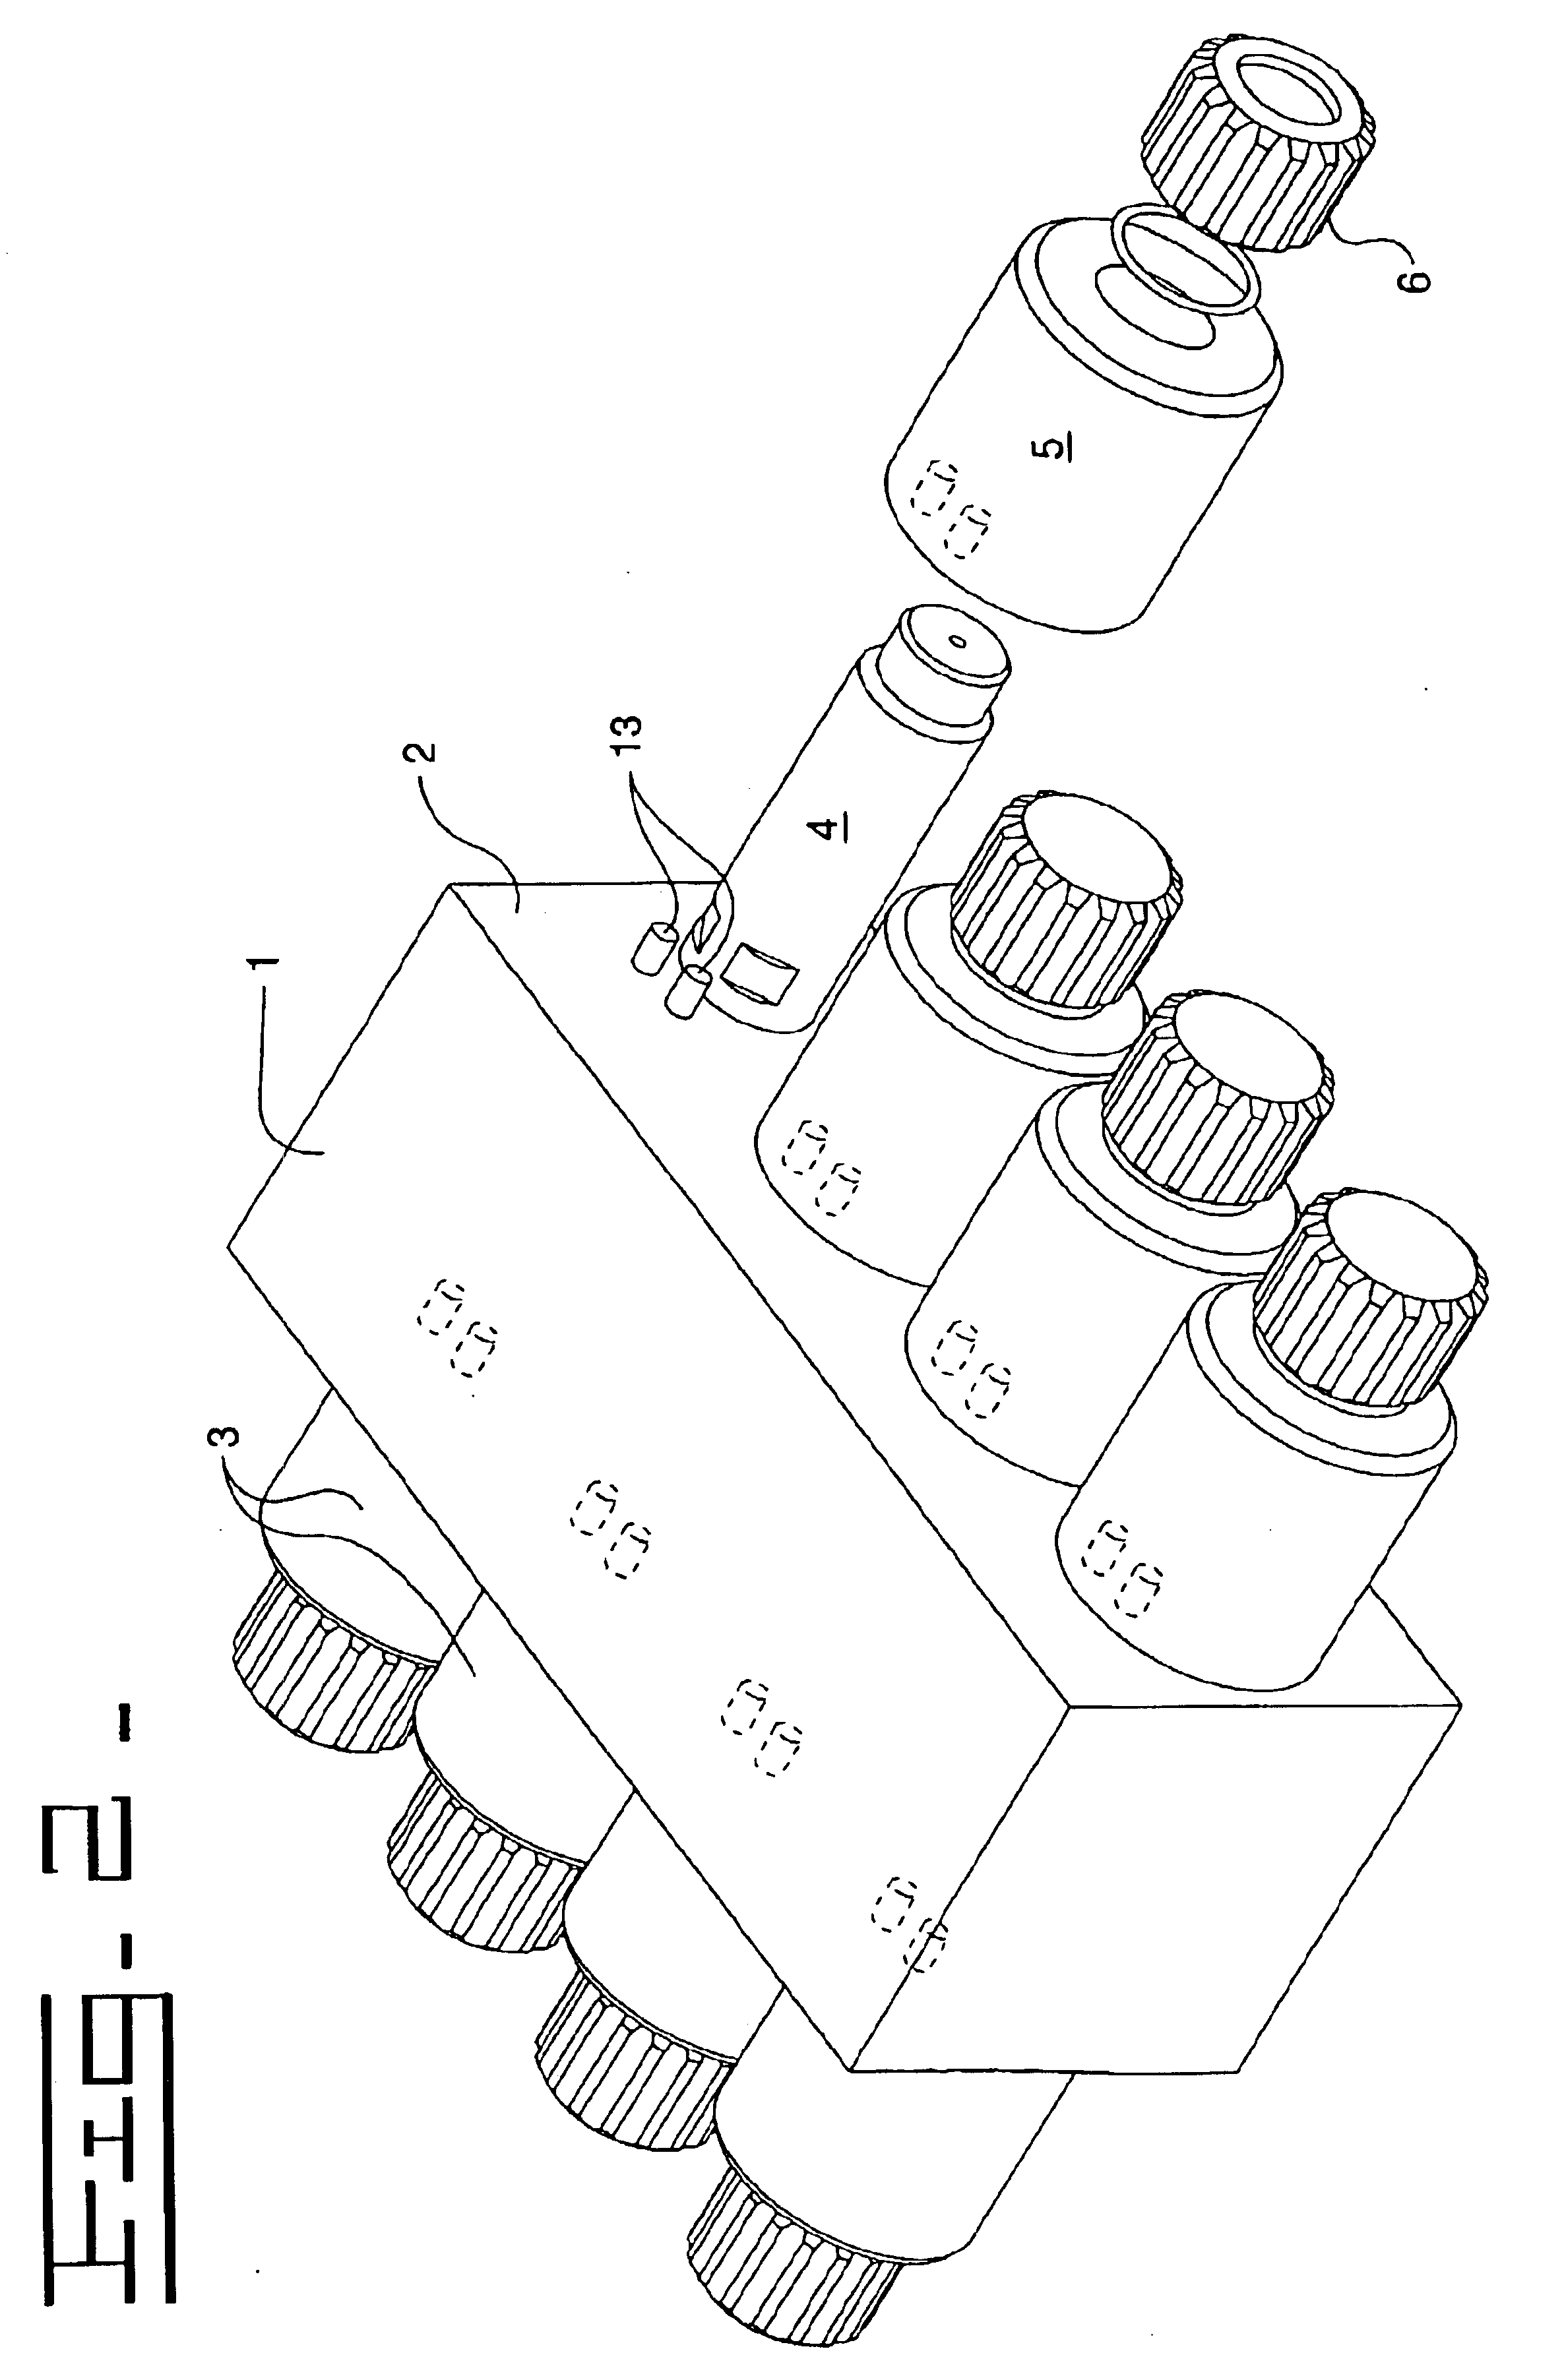 Connection device and associated process